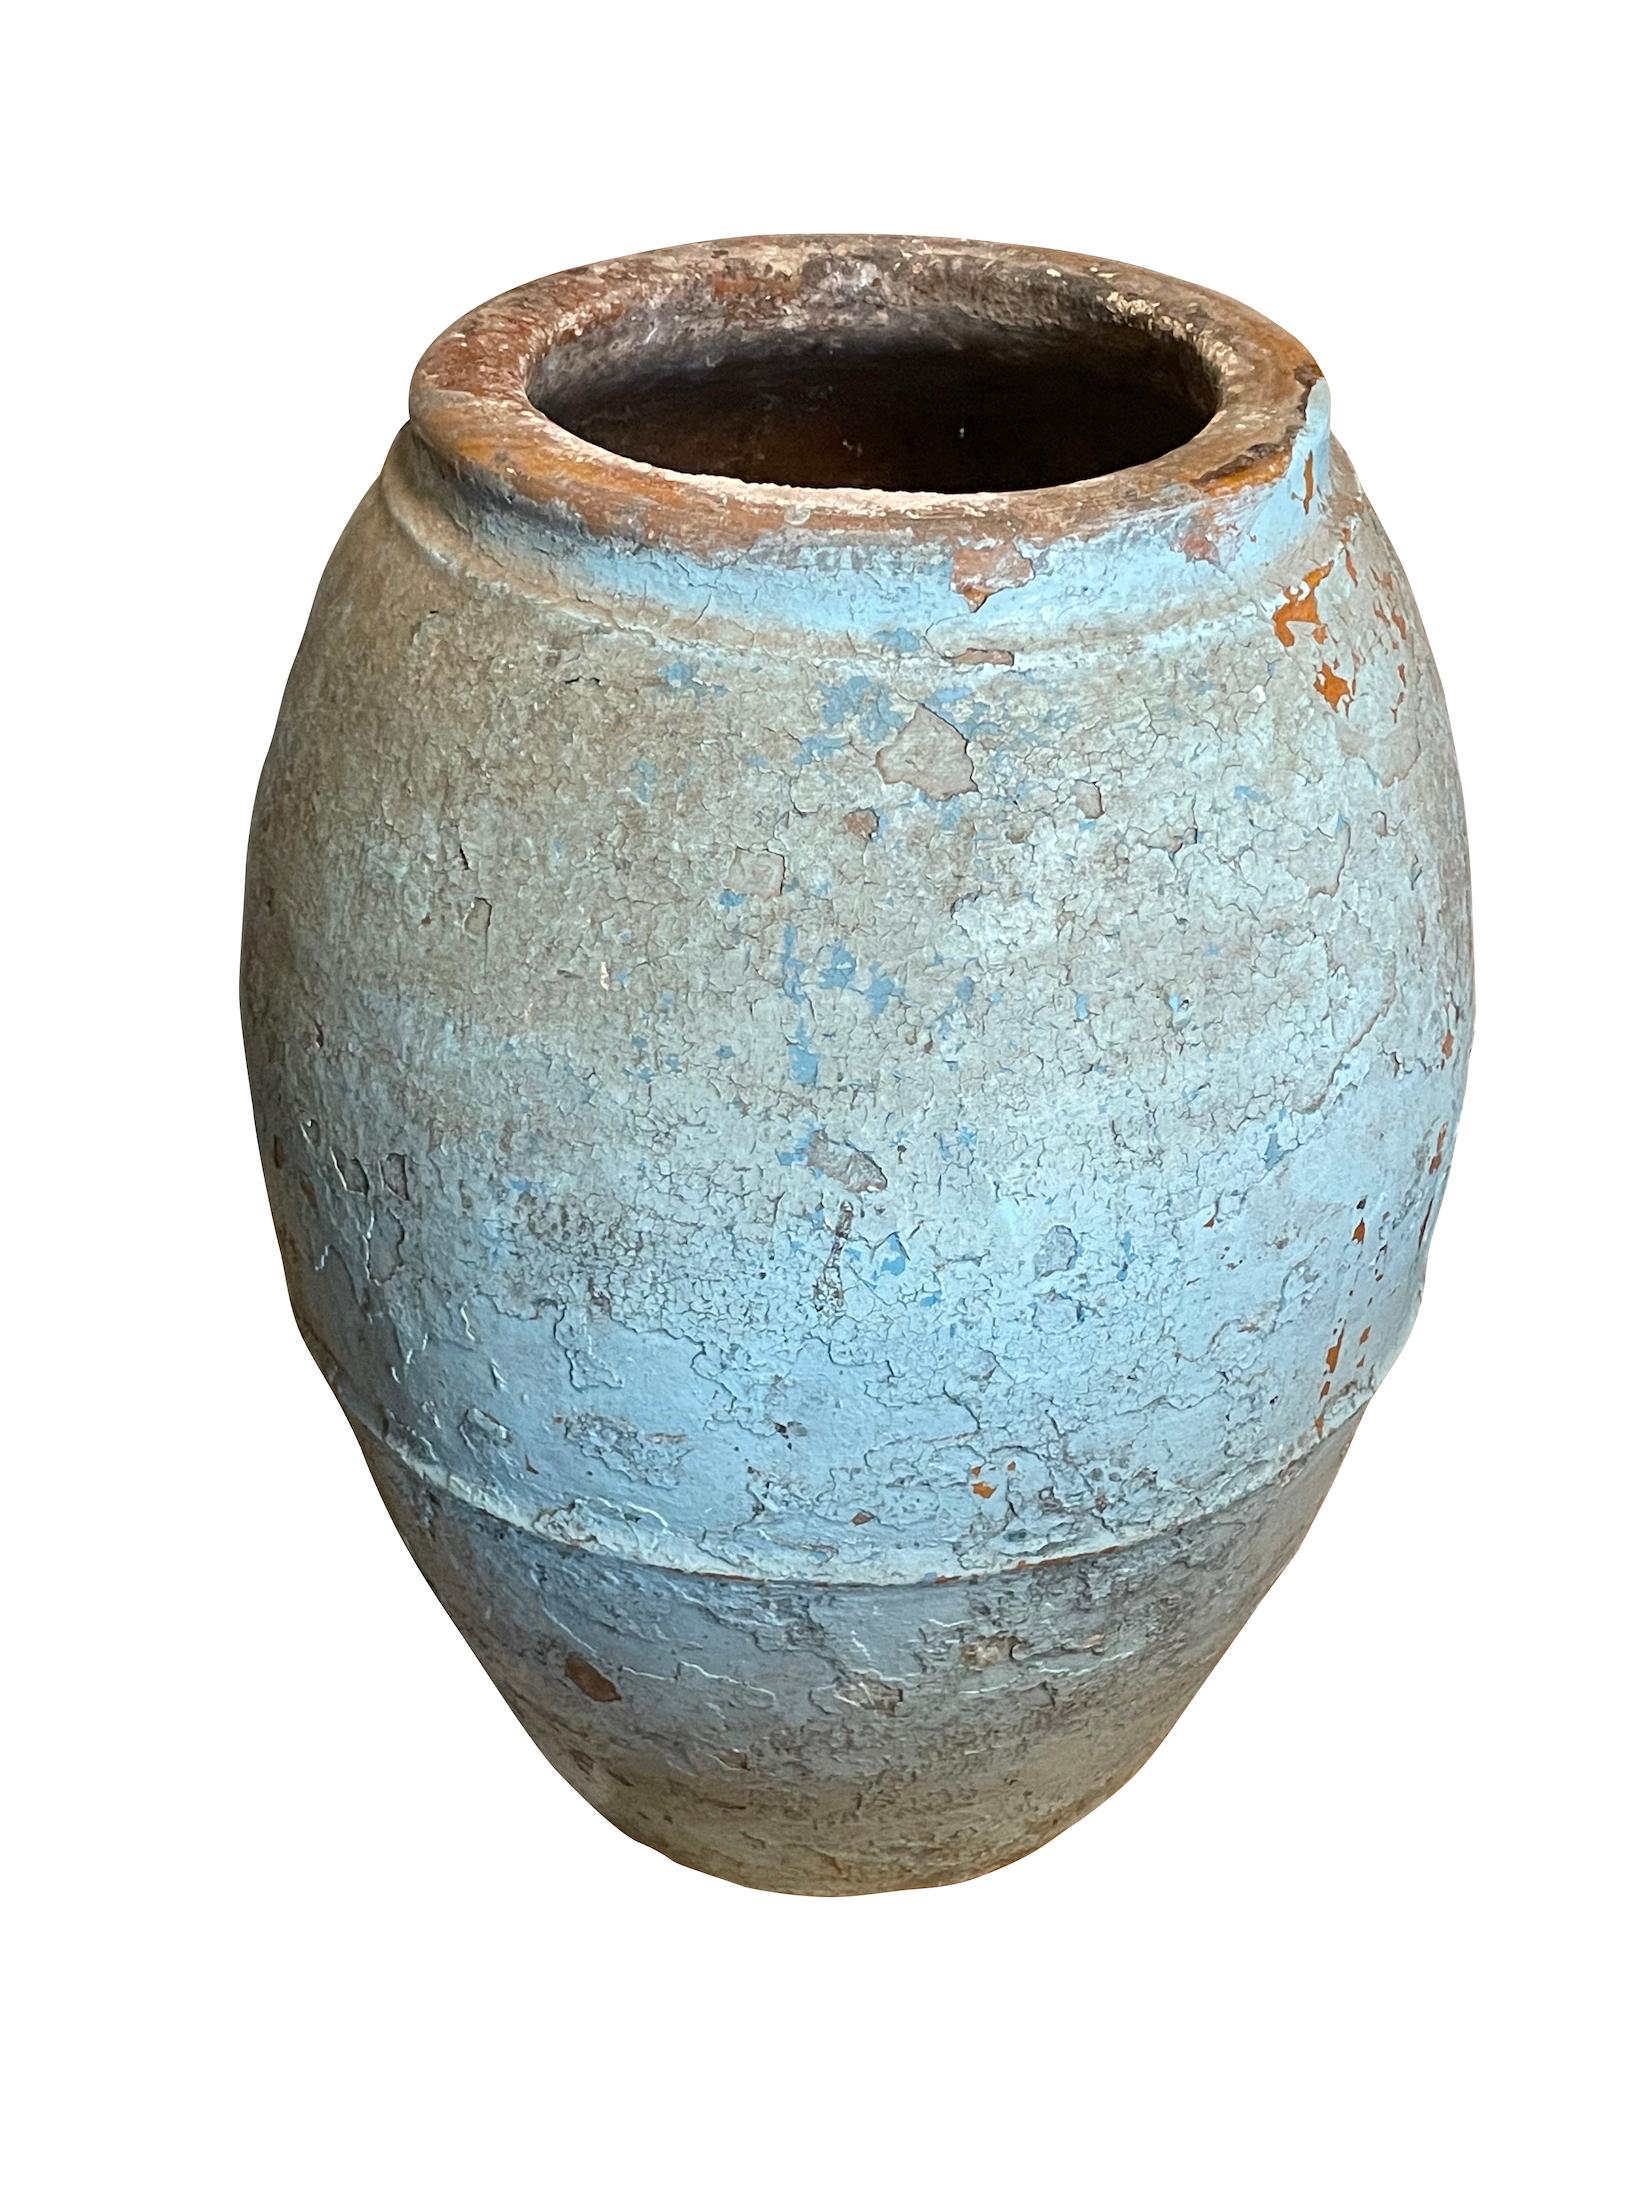 19th century Spanish terracotta olive pot.
Unearthed from a very large family run olive oil producing business in southern Spain.
Beautiful and natural aged patina.
Shades of mid blue.
One of many pieces from a large and unique collection.